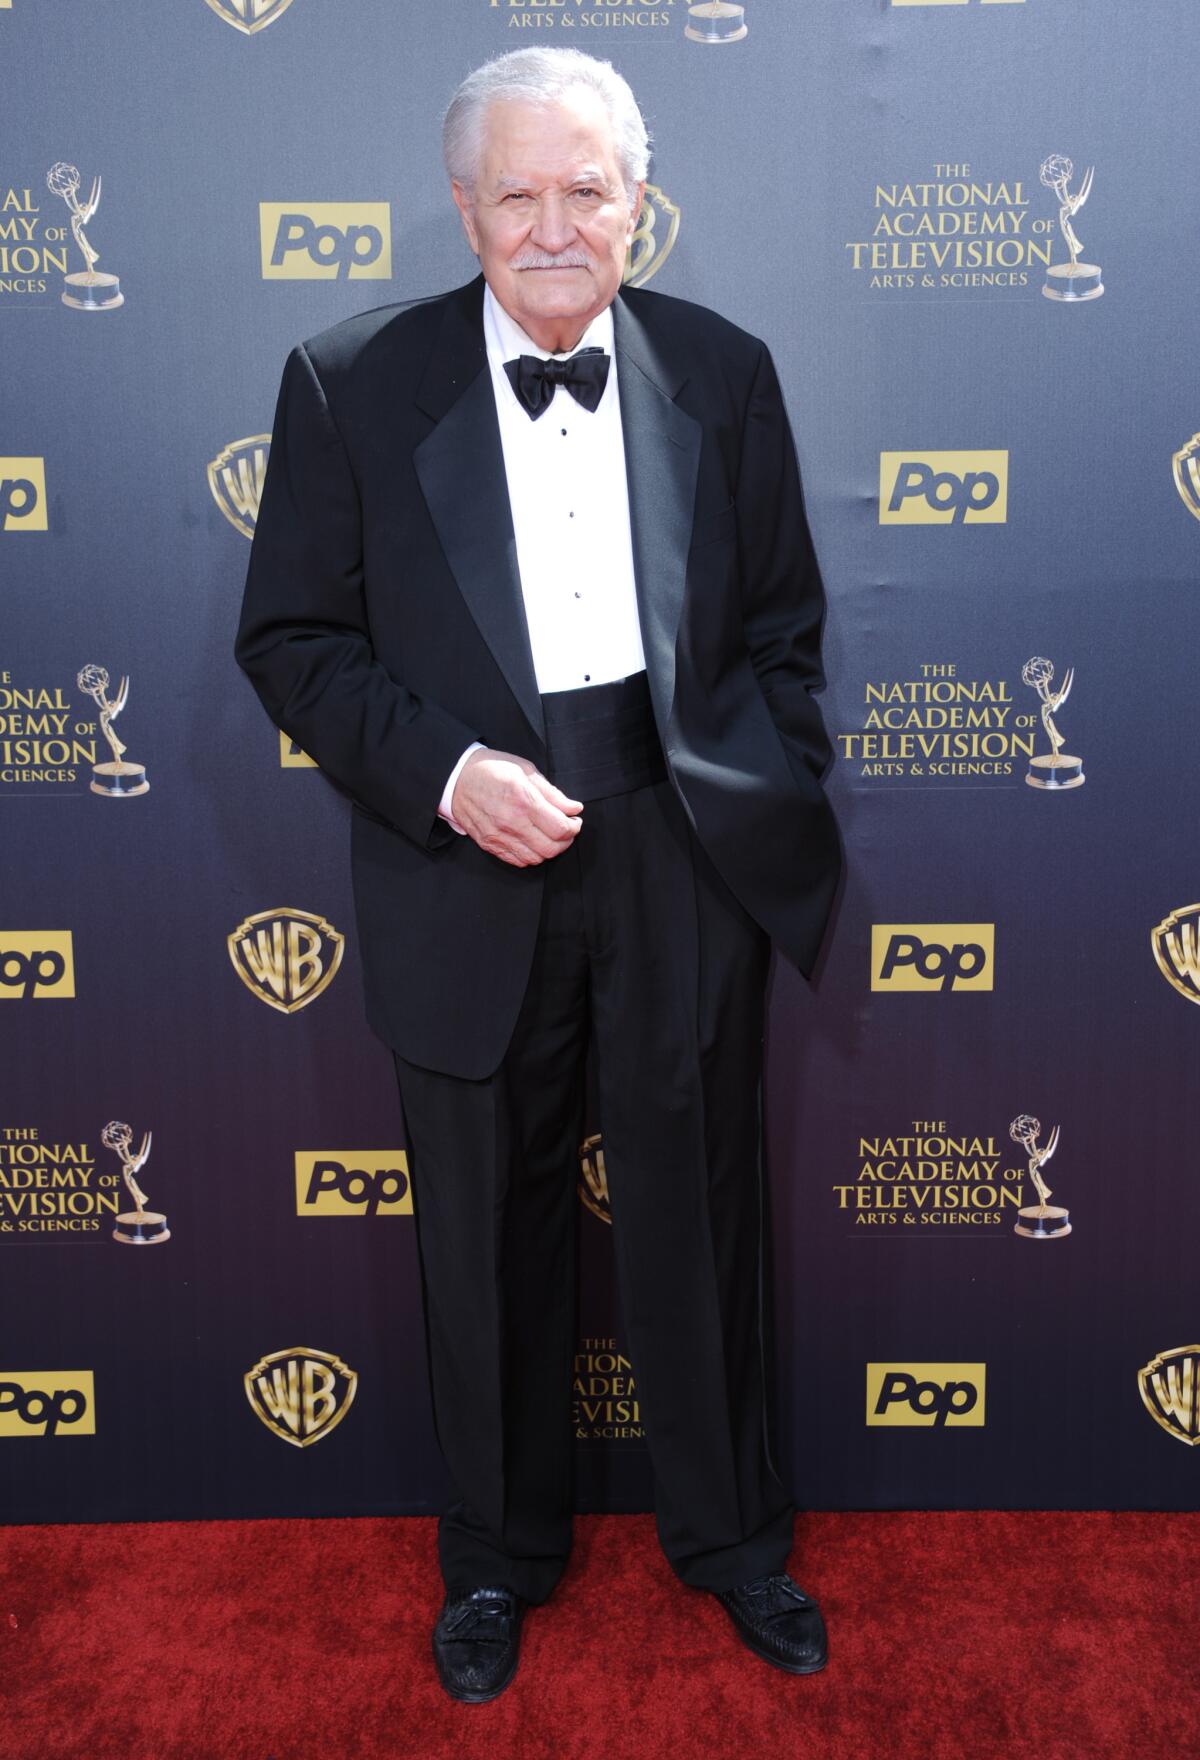 An older man wearing a tuxedo stands in front of a backdrop on a red carpet.